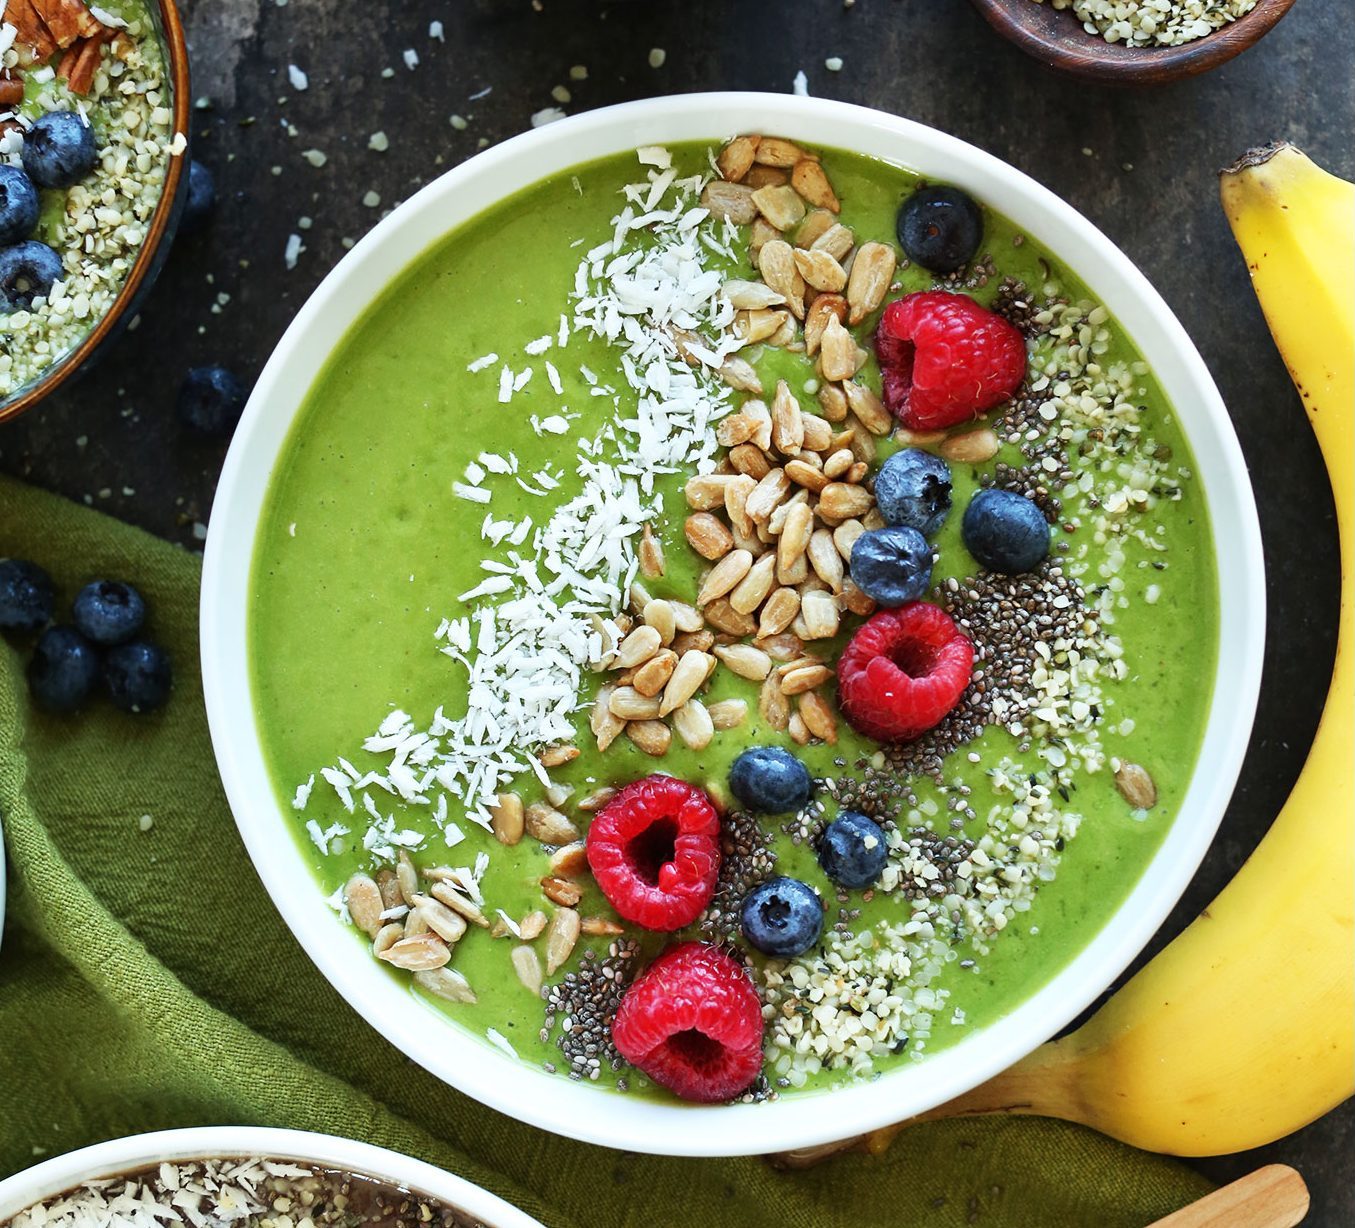 amazing-green-smoothie-bowls-change-the-color-with-shade-of-berry-the-best-way-to-make-a-smoothie-a-meal-vegan-glutenfree